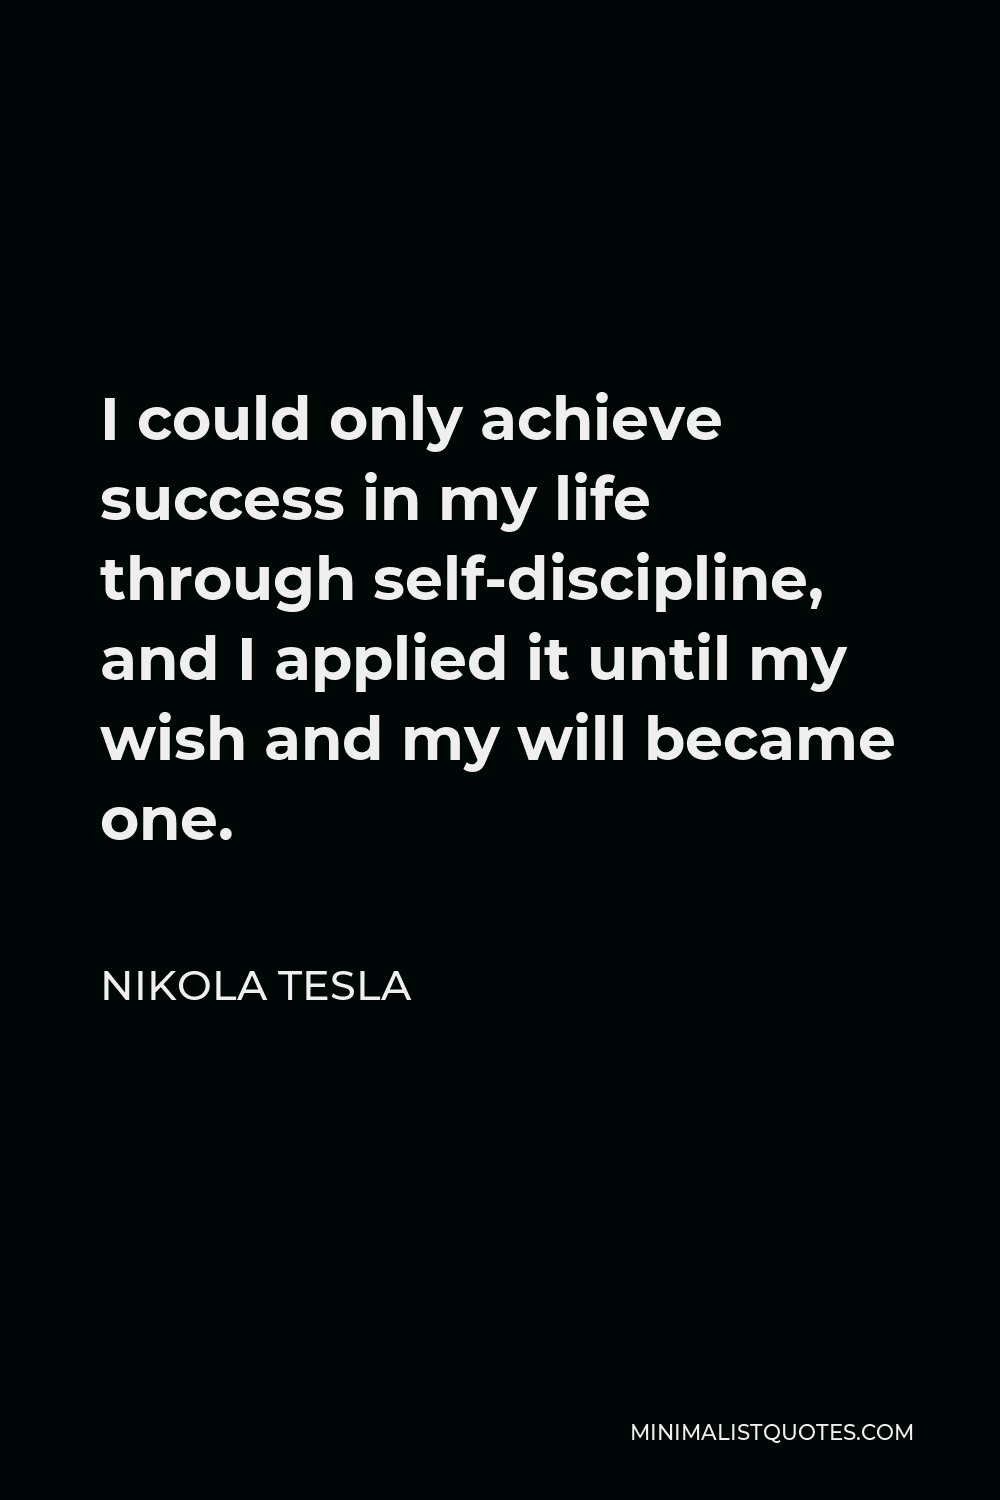 Nikola Tesla Quote - I could only achieve success in my life through self-discipline, and I applied it until my wish and my will became one.